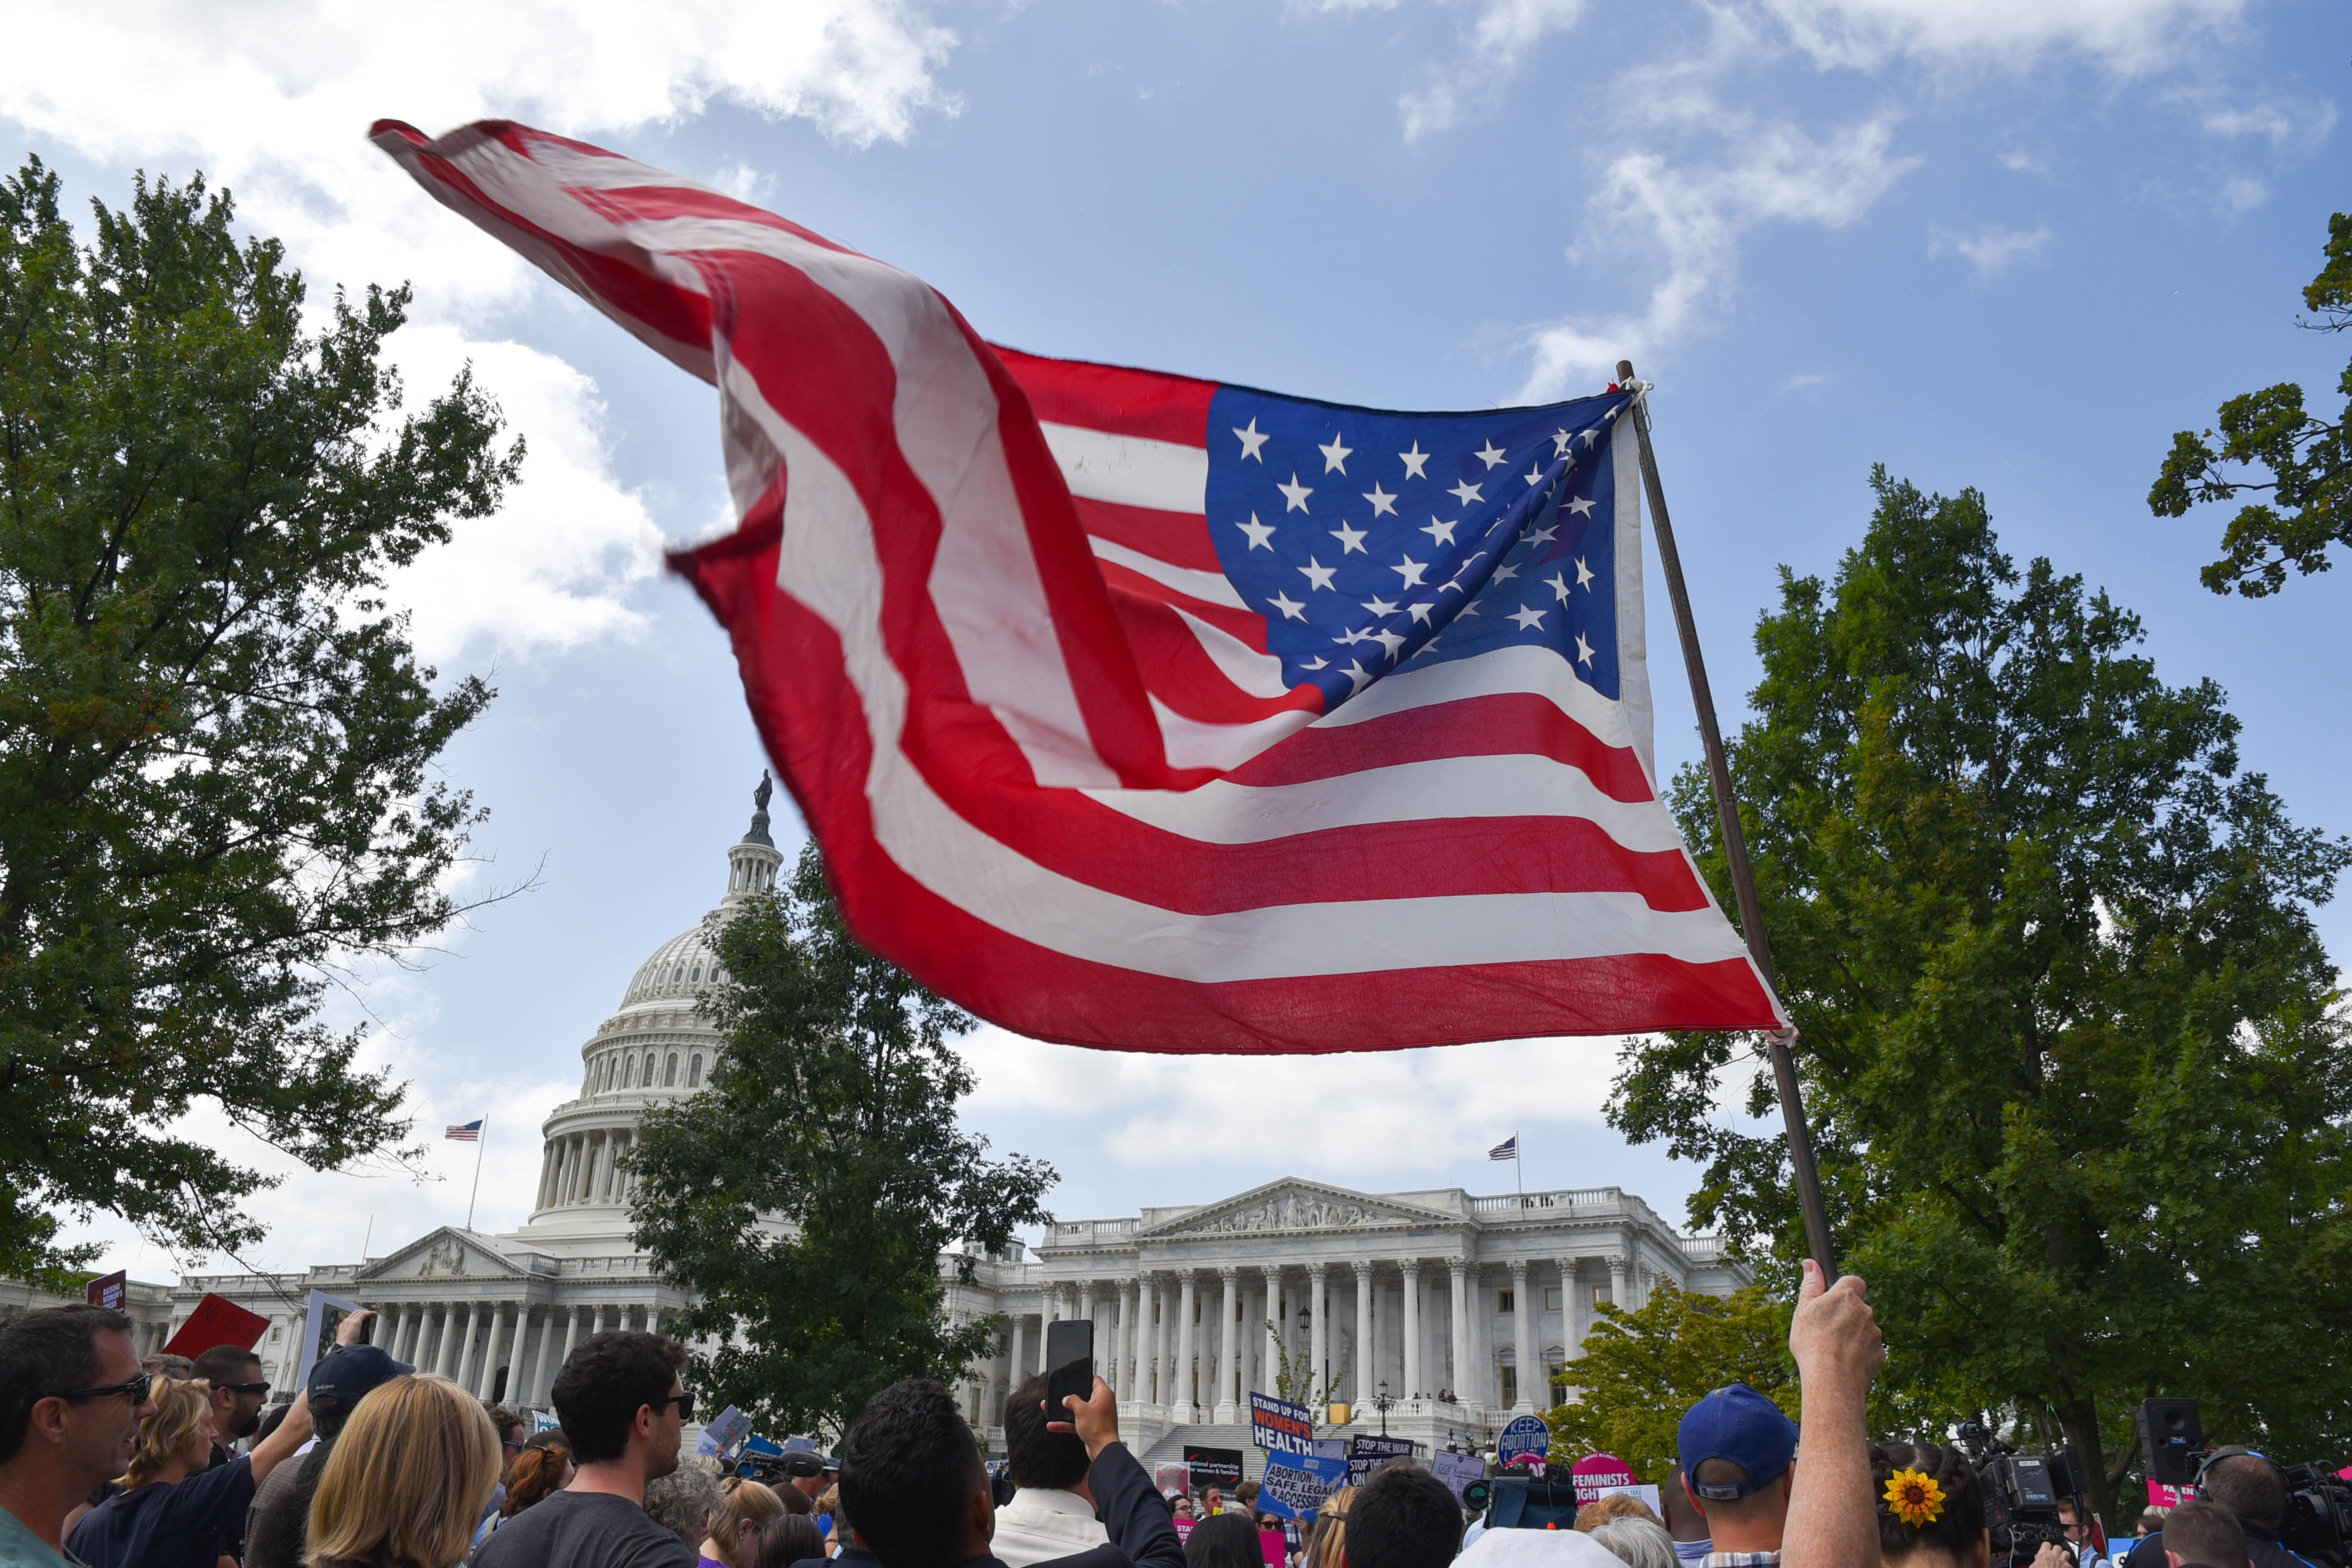 A protester waves an American flag in the breeze outside the U.S. Capitol